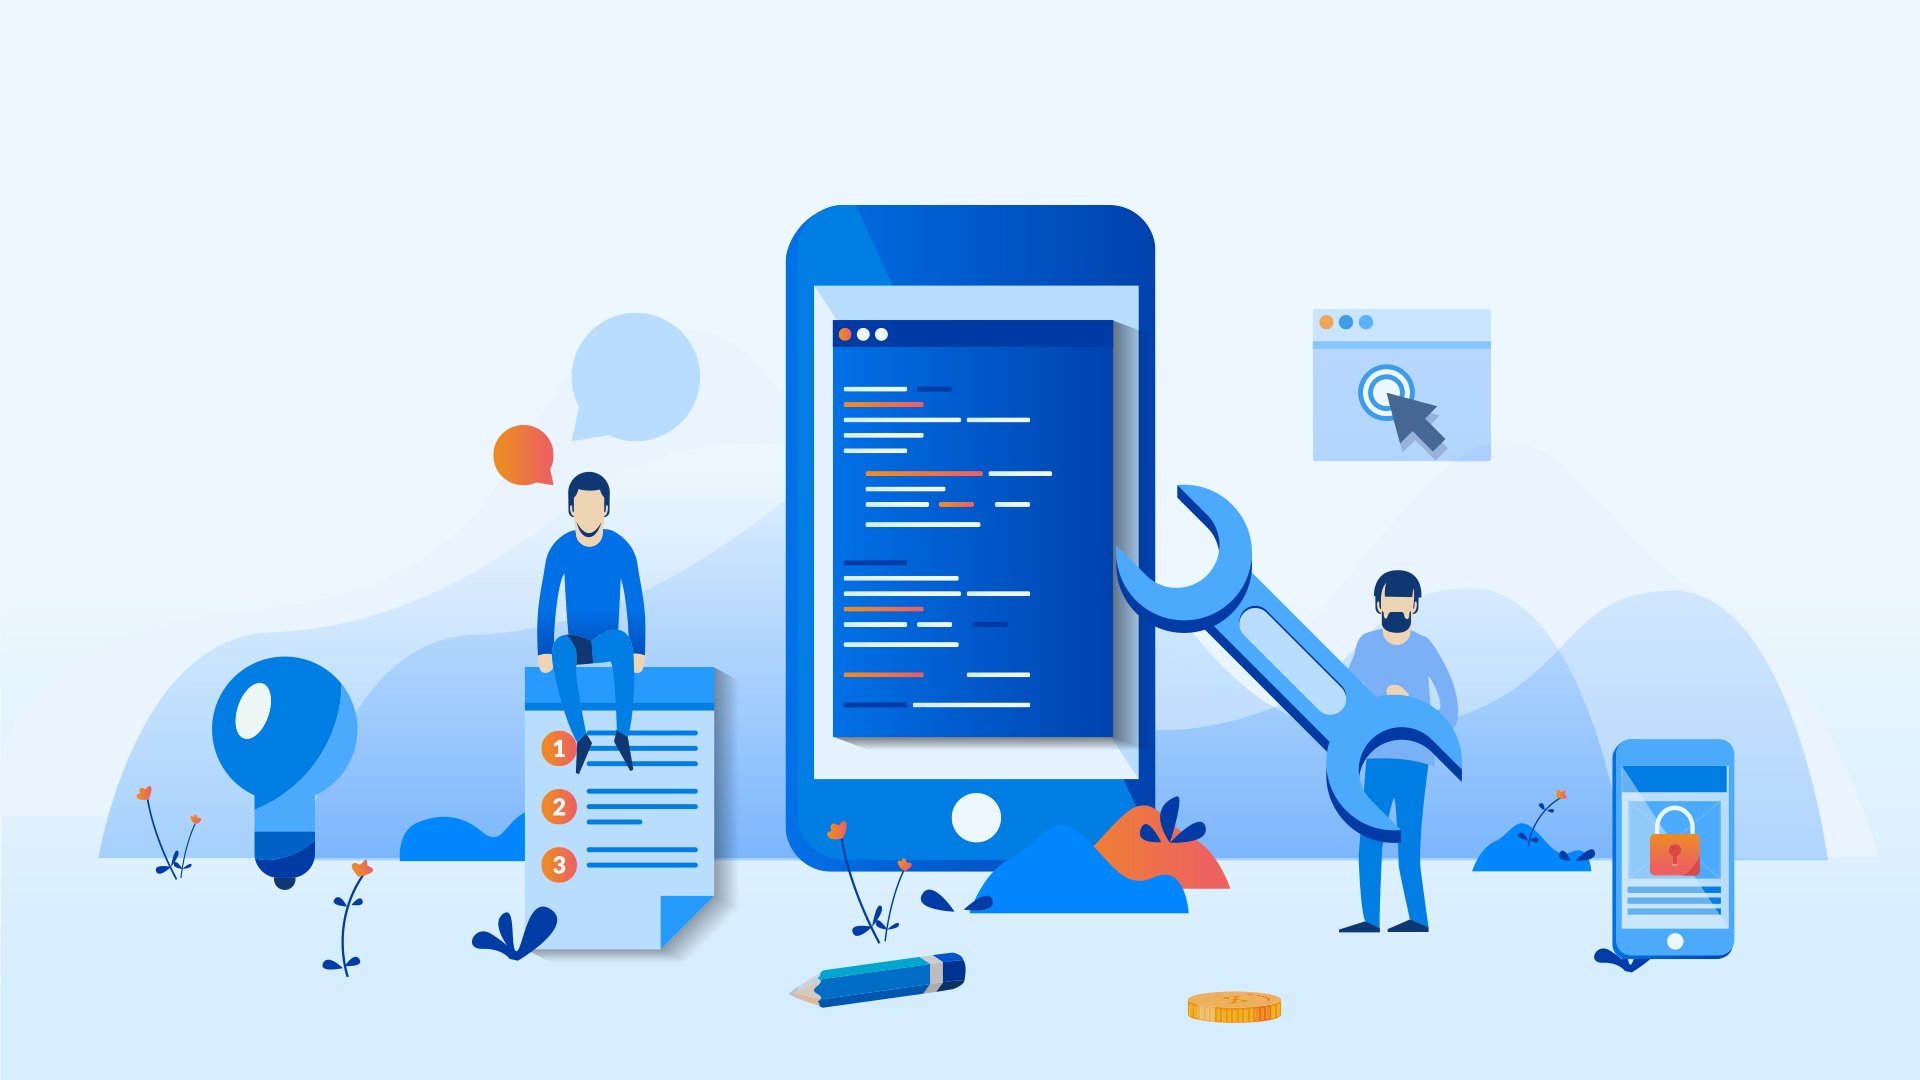 Ultimate Guide to Mobile App Development Companies: Trends, Tips & Top Picks - Global Insights, One Guest Post at a Time